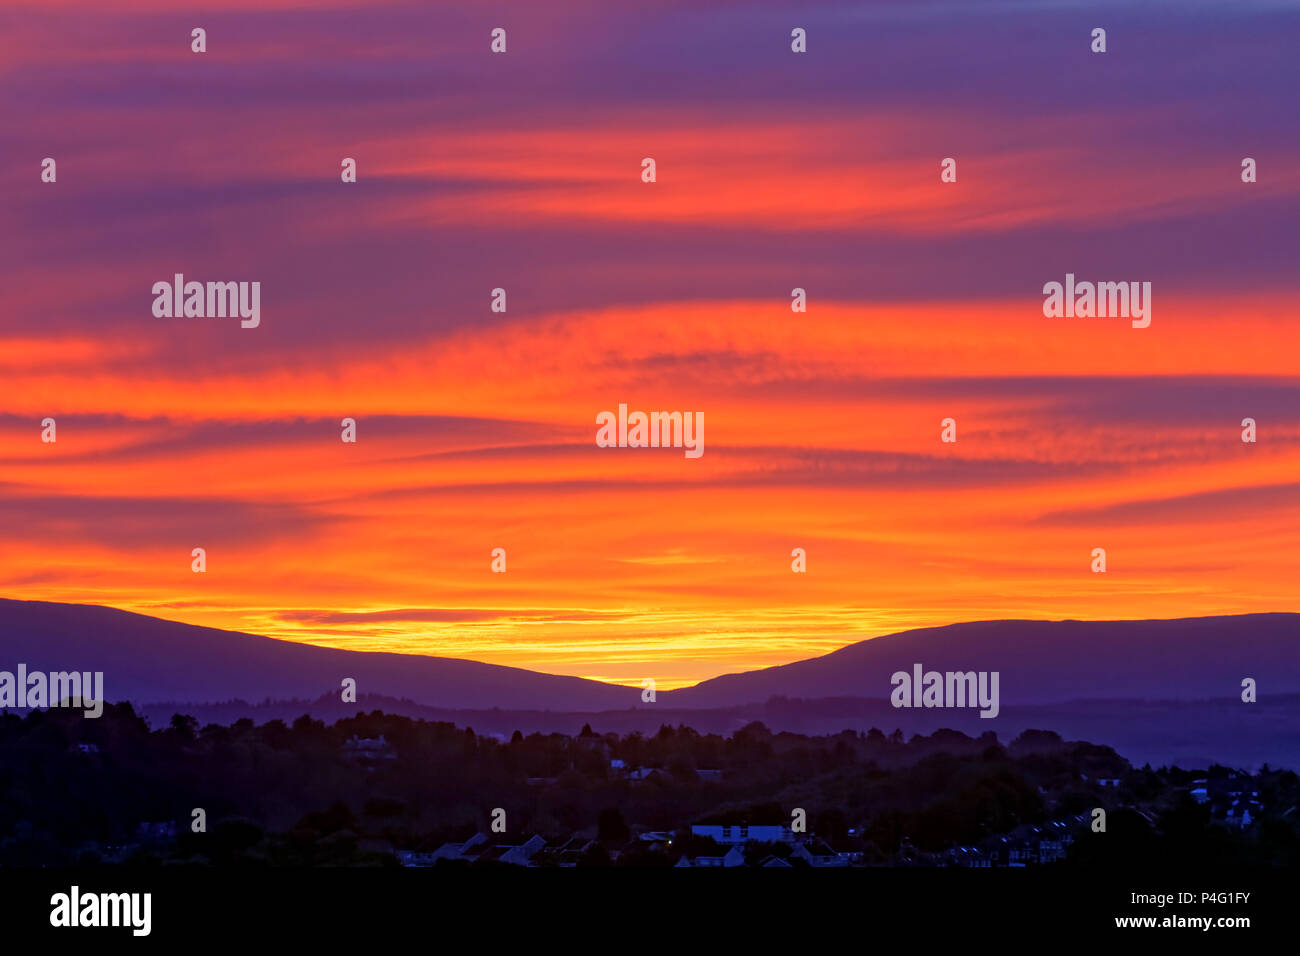 Glasgow, Scotland, UK 22nd June. UK Weather: Midsummer passes and a stunning  fiery sunrise for the beginning of summer as the gap in the Campsie fells  hills North of the city hosts a bright red start with wavy cloud formations taking on the rosy hue. Gerard Ferry/Alamy news Stock Photo